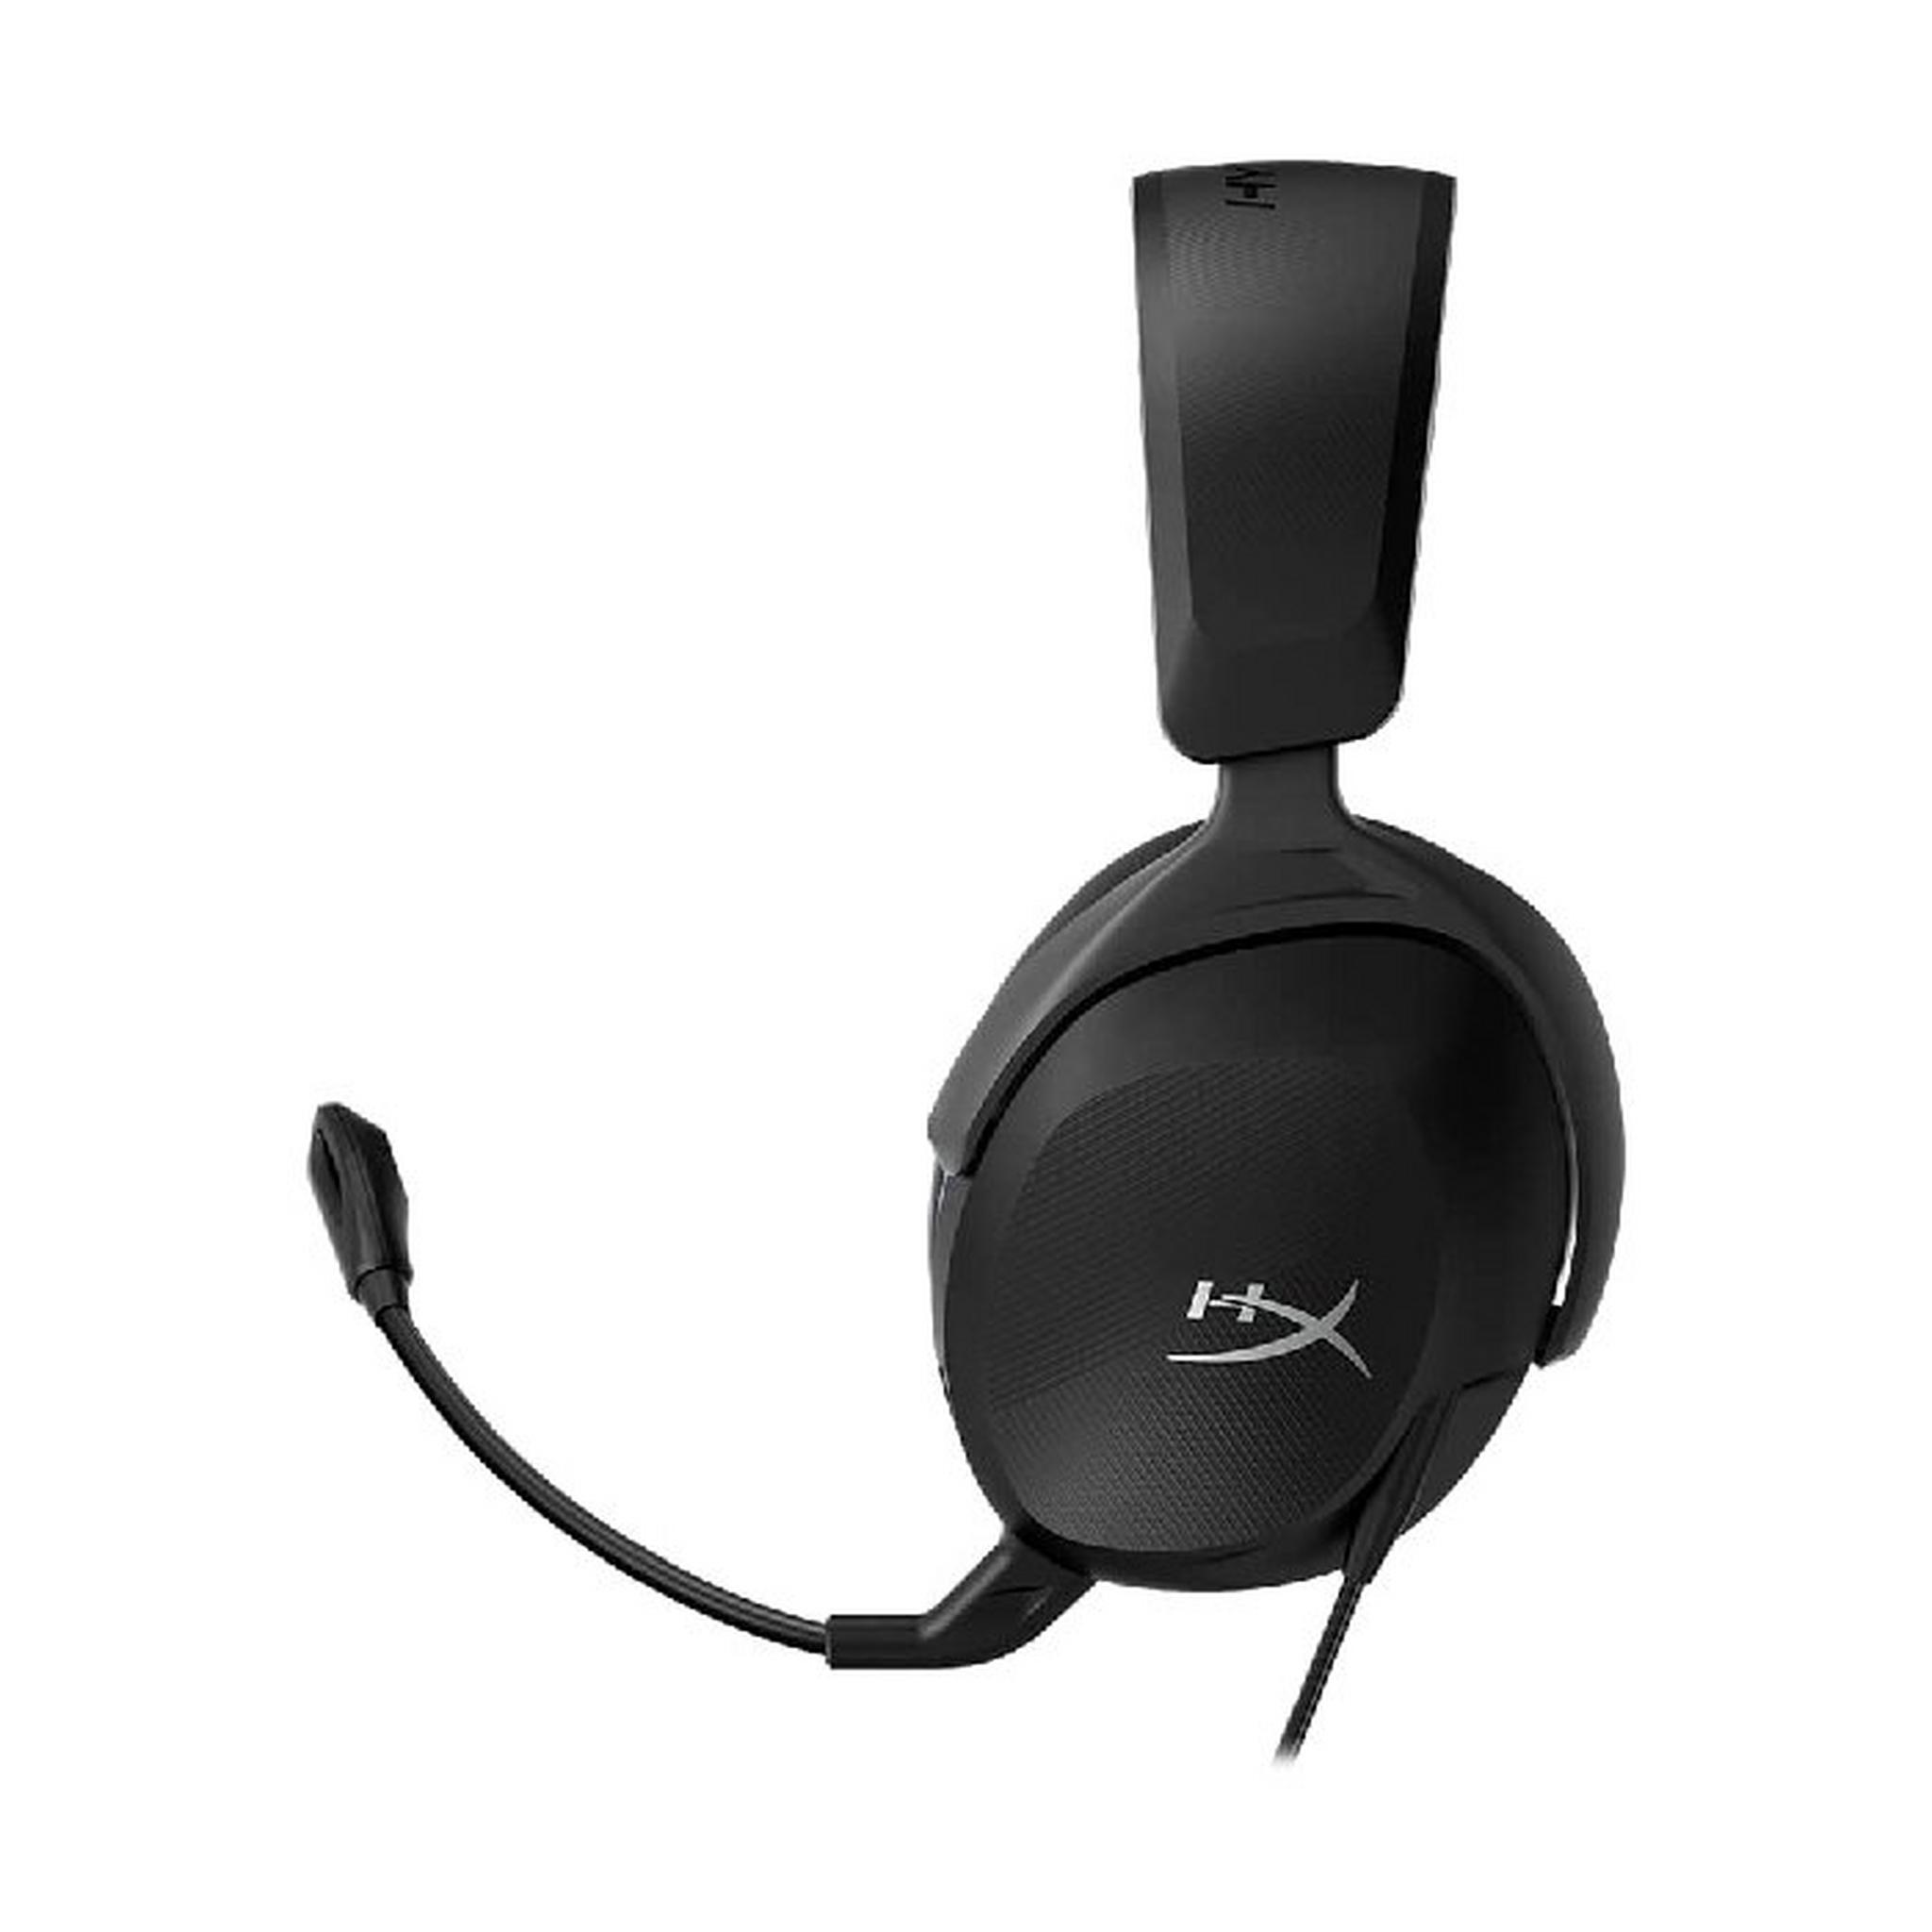 HyperX Cloud Stinger 2 Core Gaming Headset for PlayStation 5, Over-Ear Headset with mic, 40mm Drivers, 6H9B6AA - Black